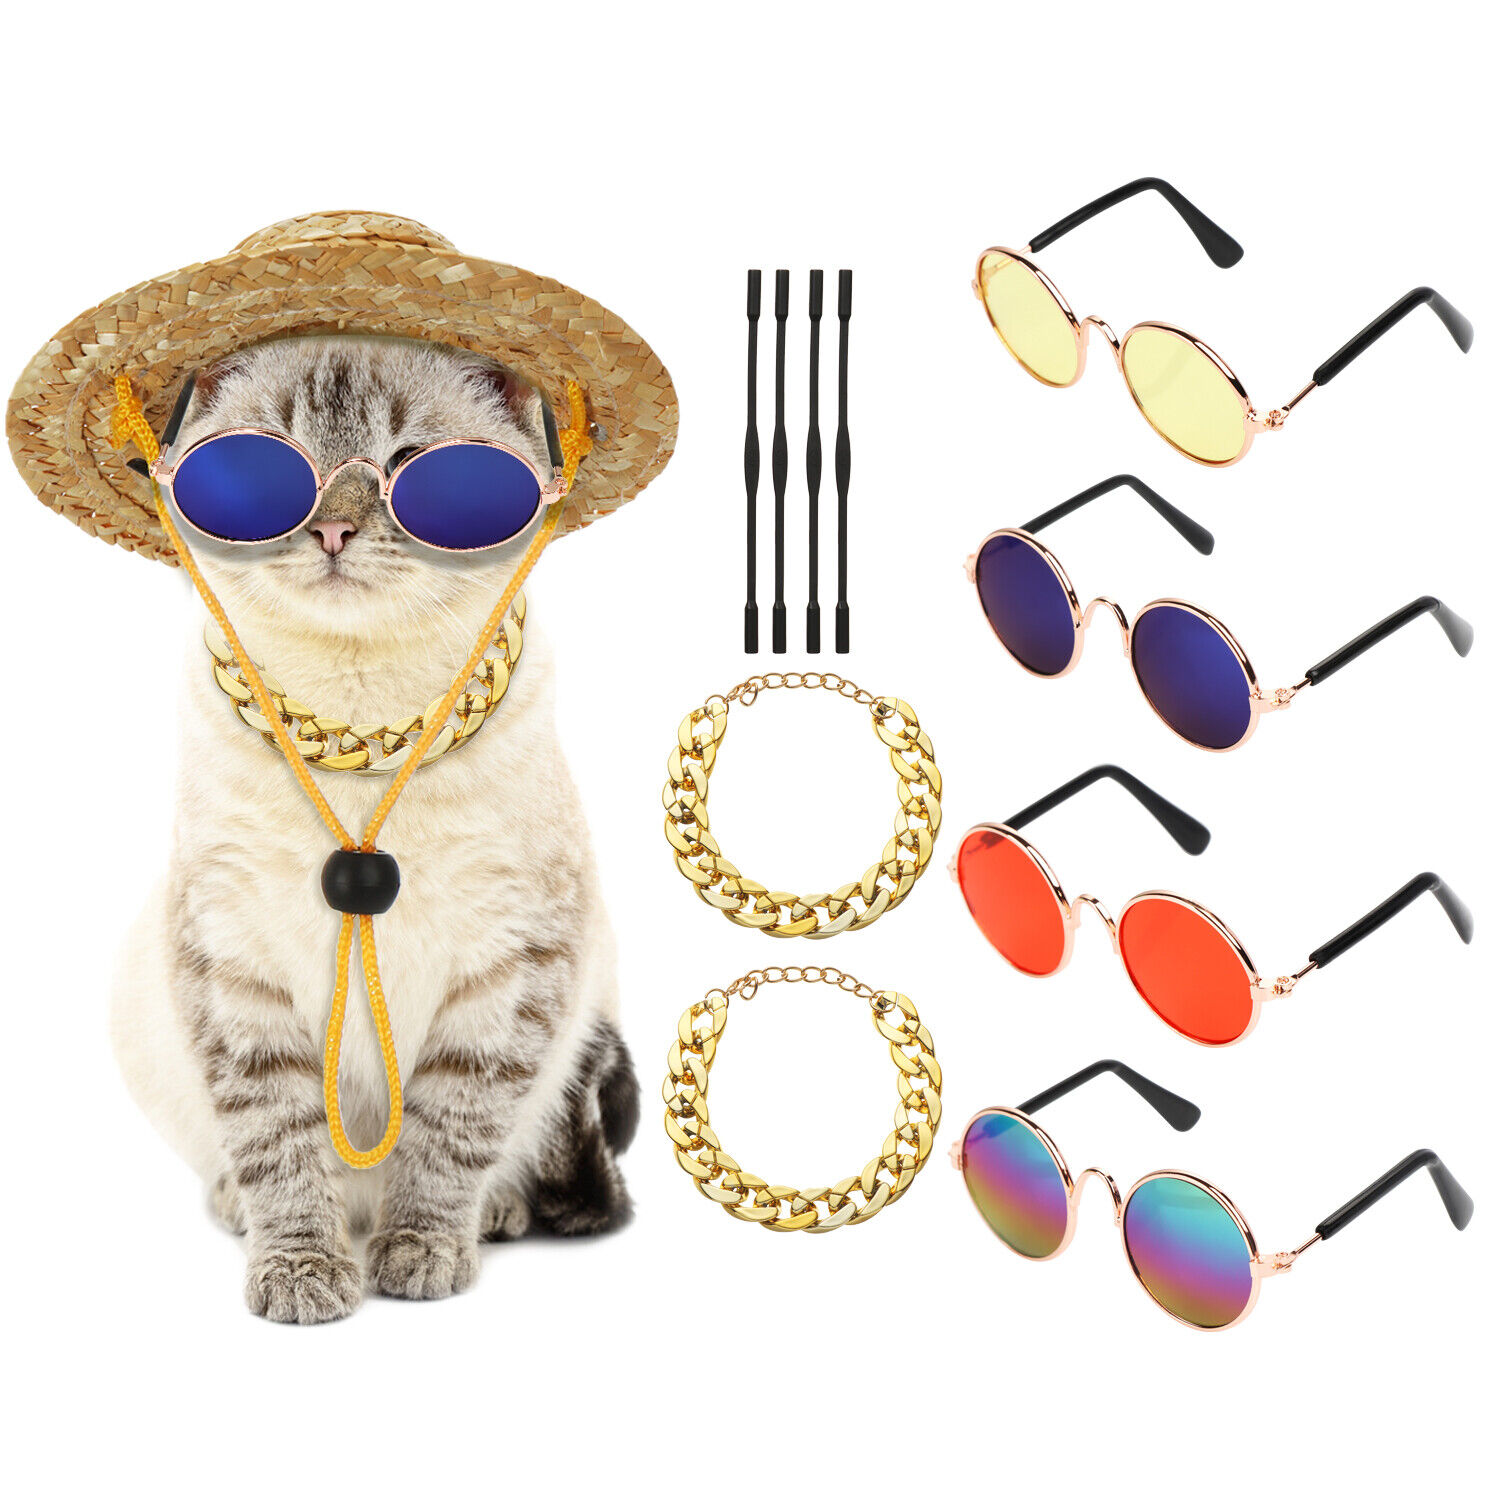 chain for dogs dog sunglasses cat glasses dog glasses dog goggles For Cat|Dog